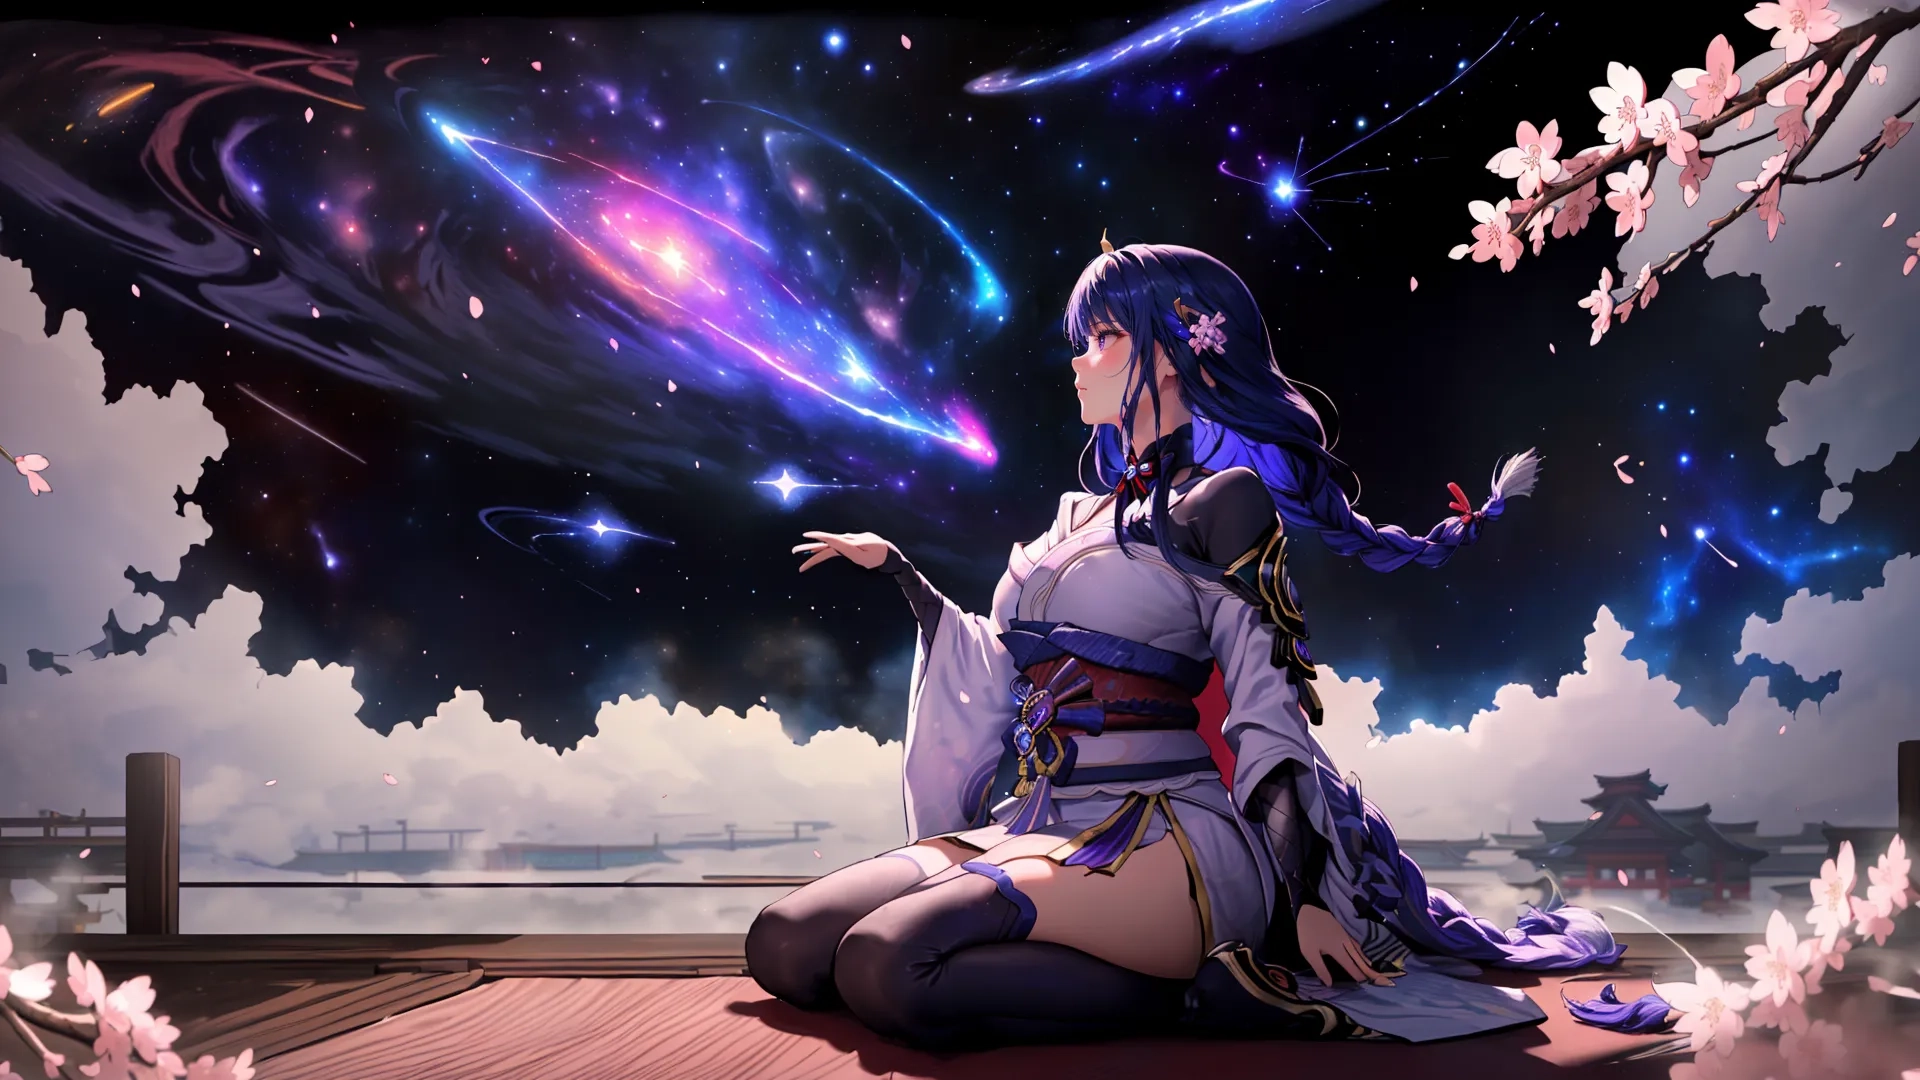 a woman who is sitting on top of a floor looking at something while wearing a purple outfit and holding a black wand, looks at the sky
